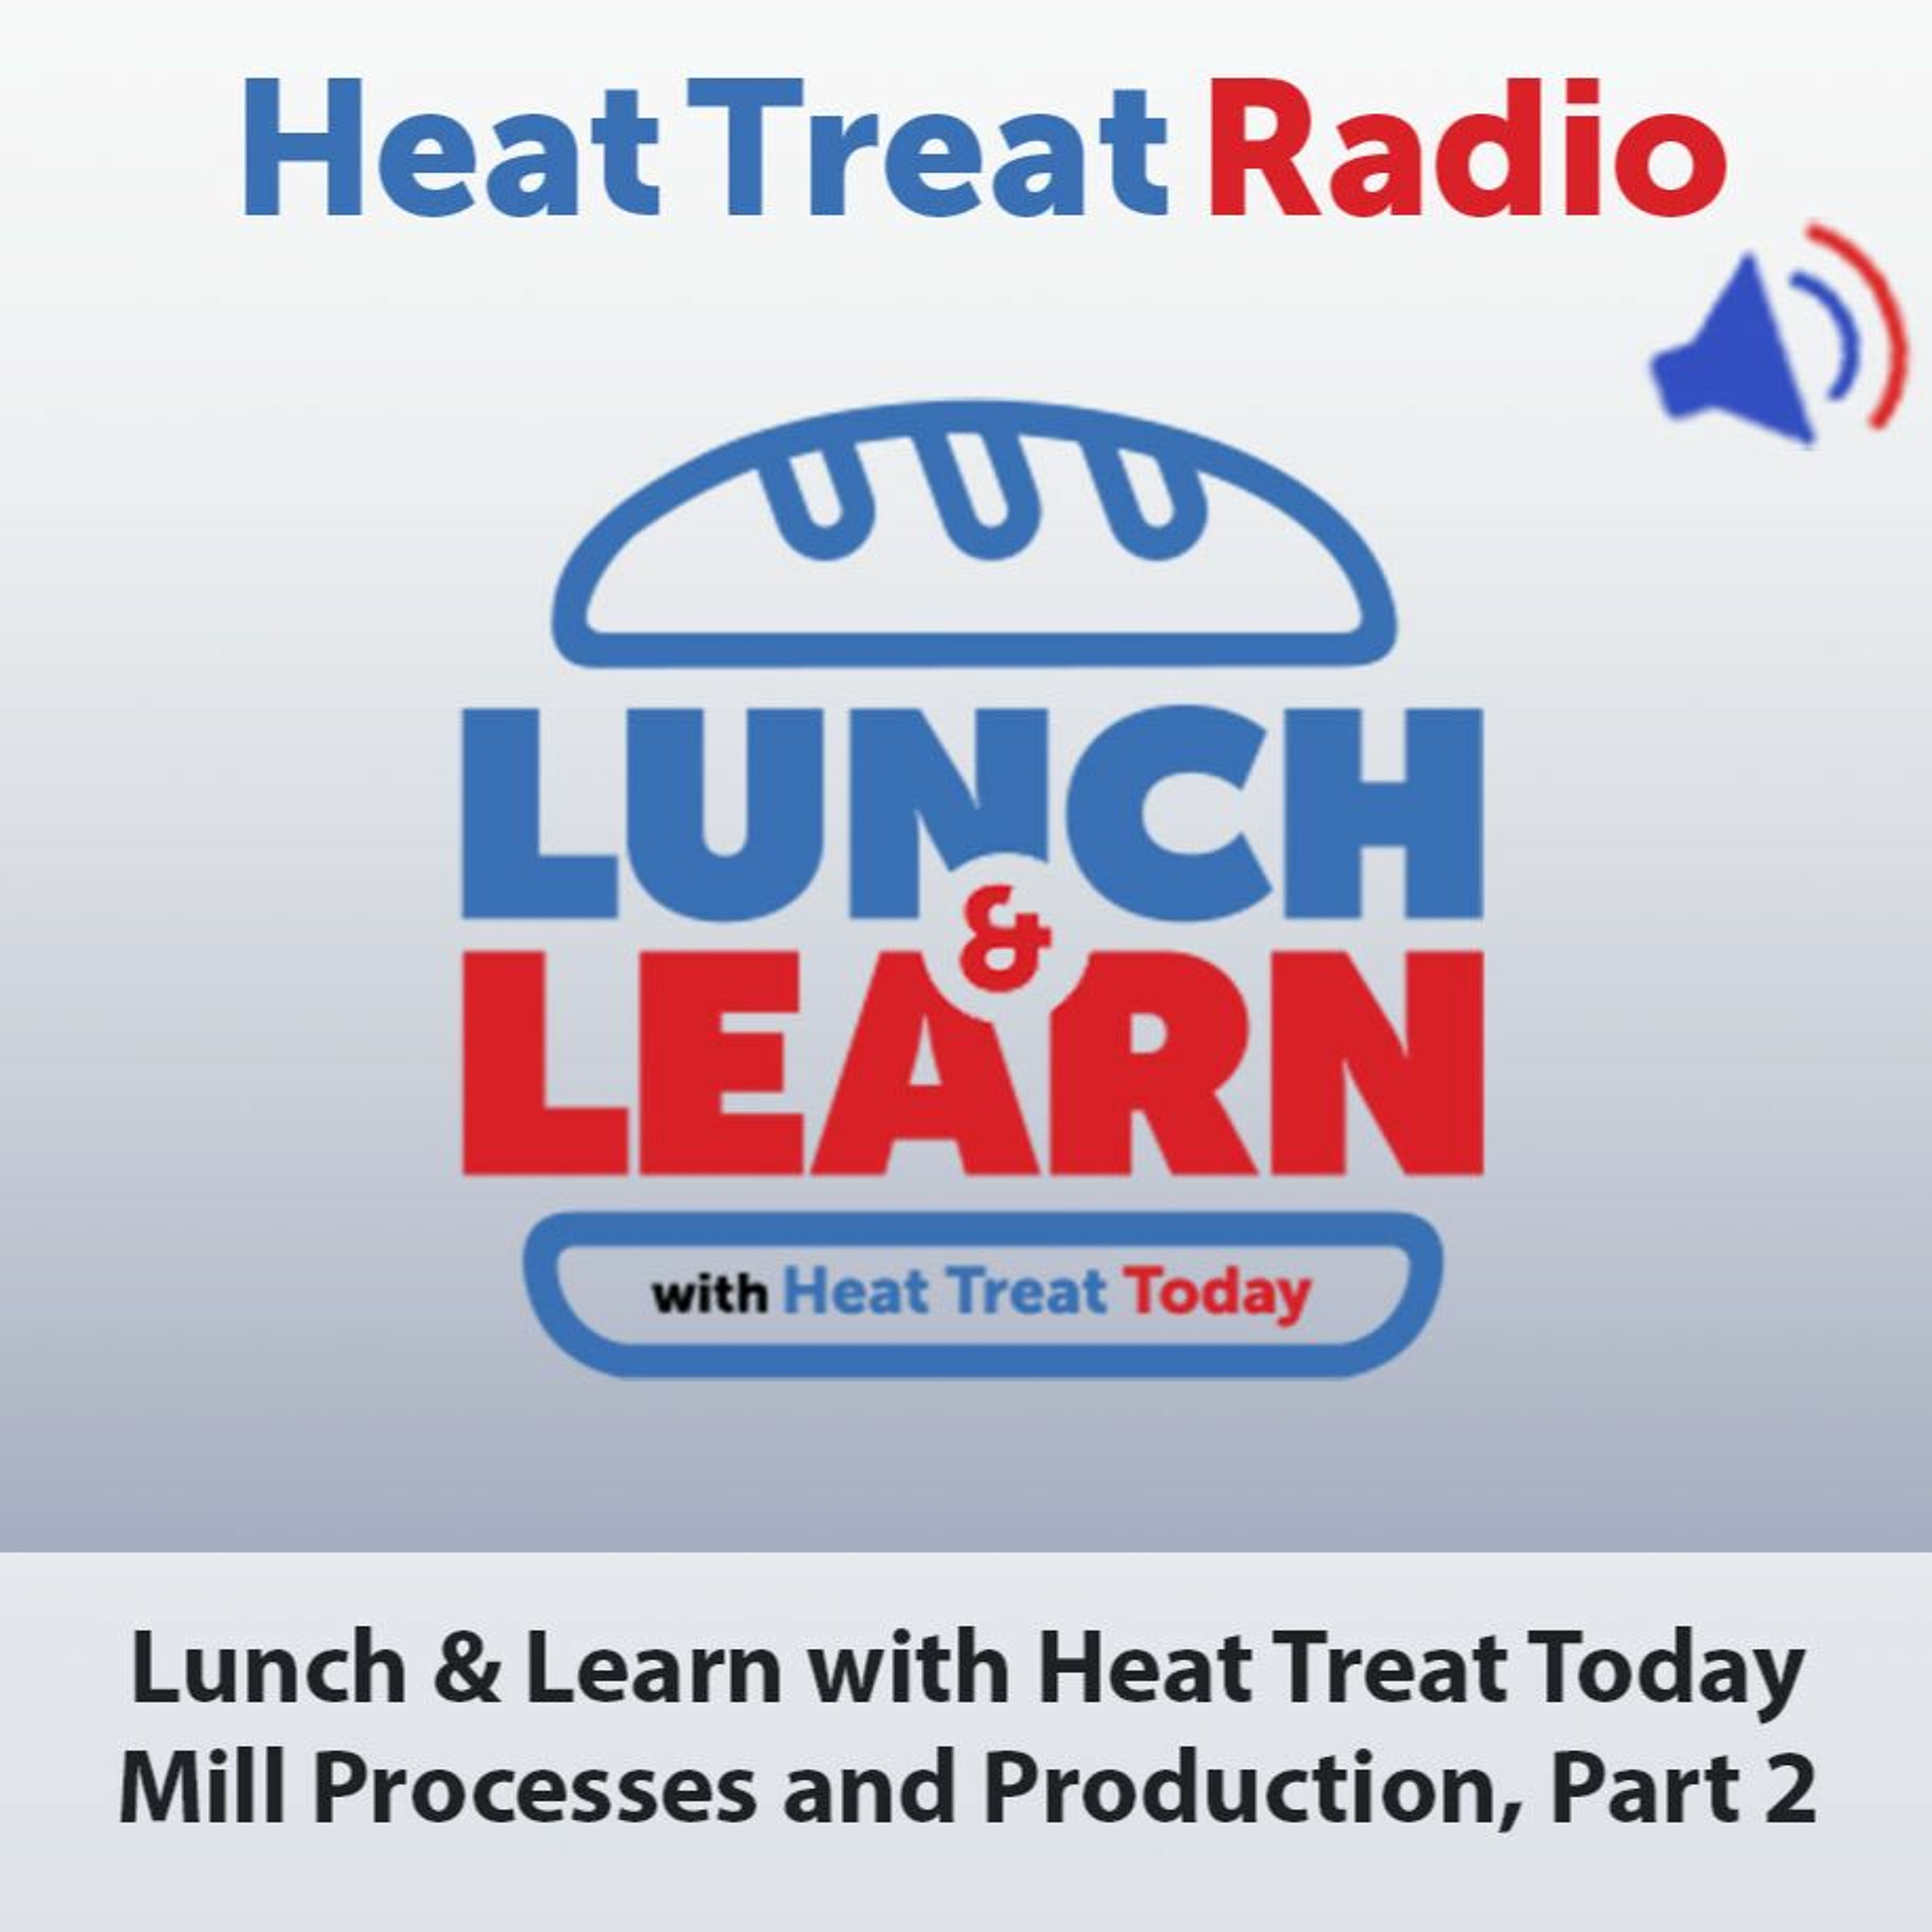 Heat Treat Radio #80: Lunch & Learn with Heat Treat Today – Mill Processes and Production, Part 2